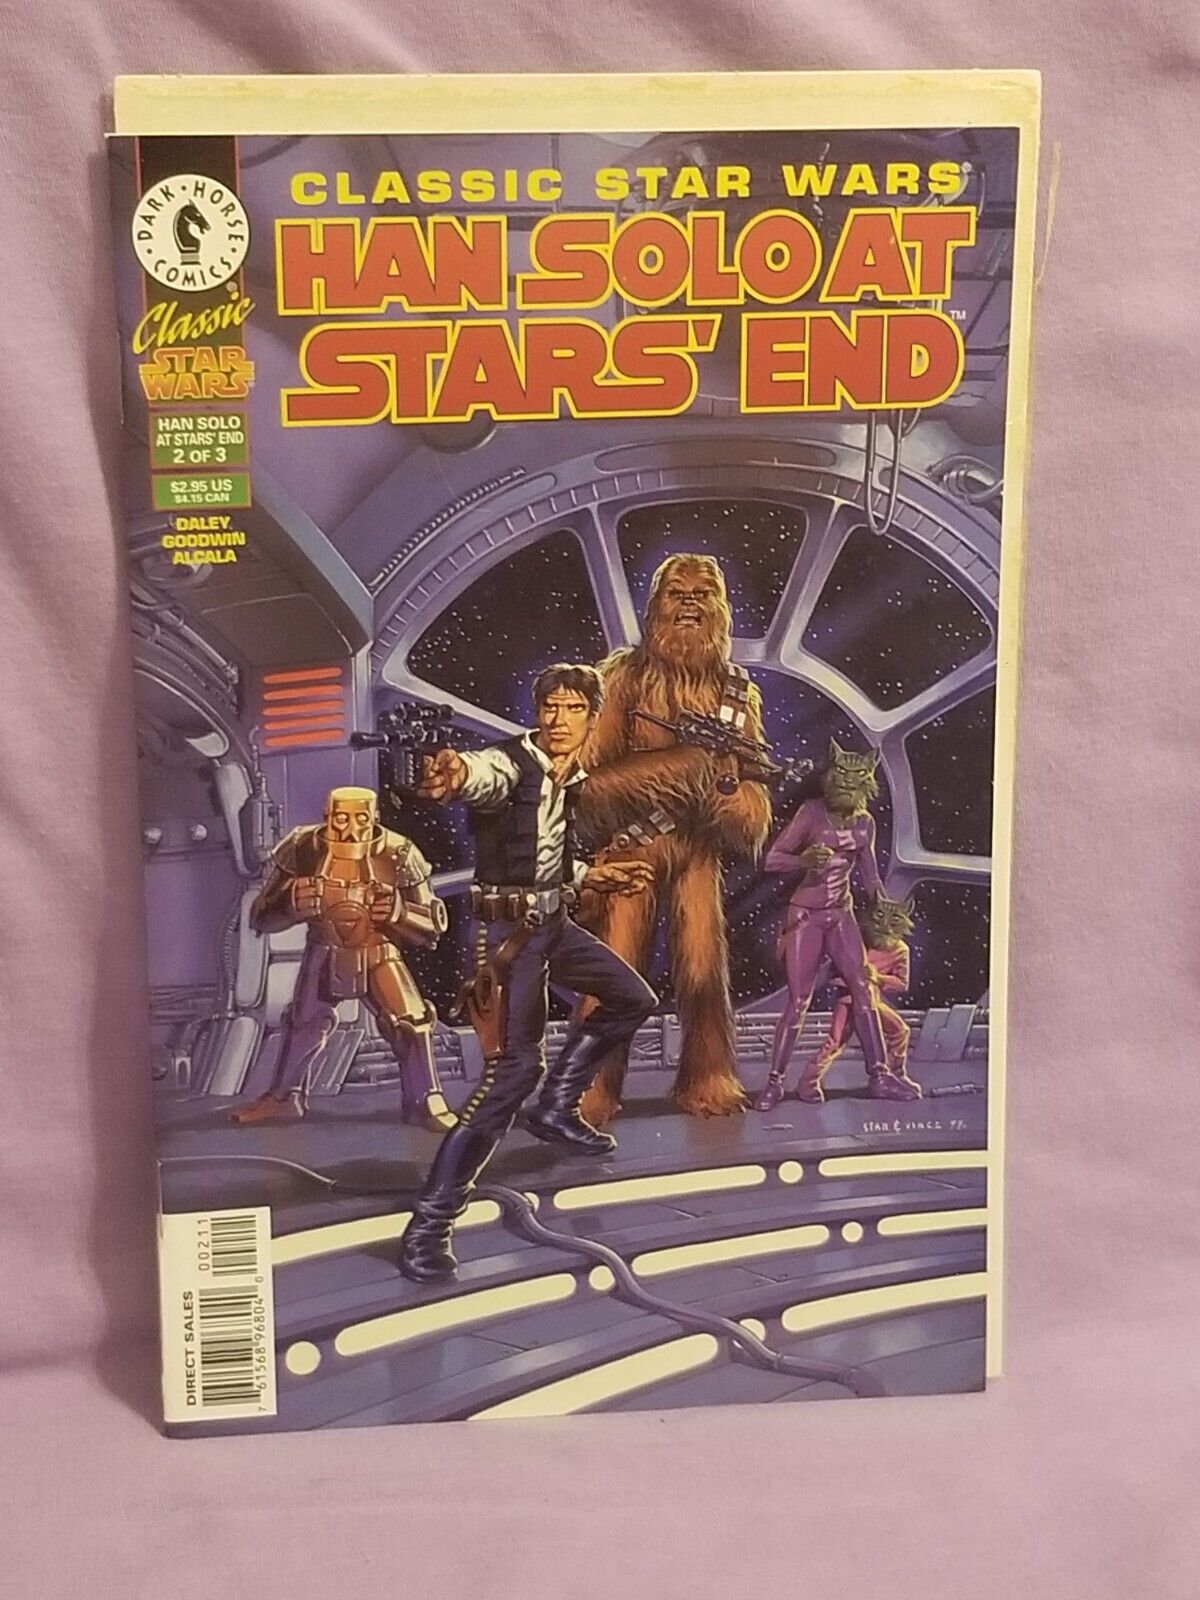 Classic Star Wars - Han Solo at Stars End #2 from Dark Horse Comics ---- Goodwin